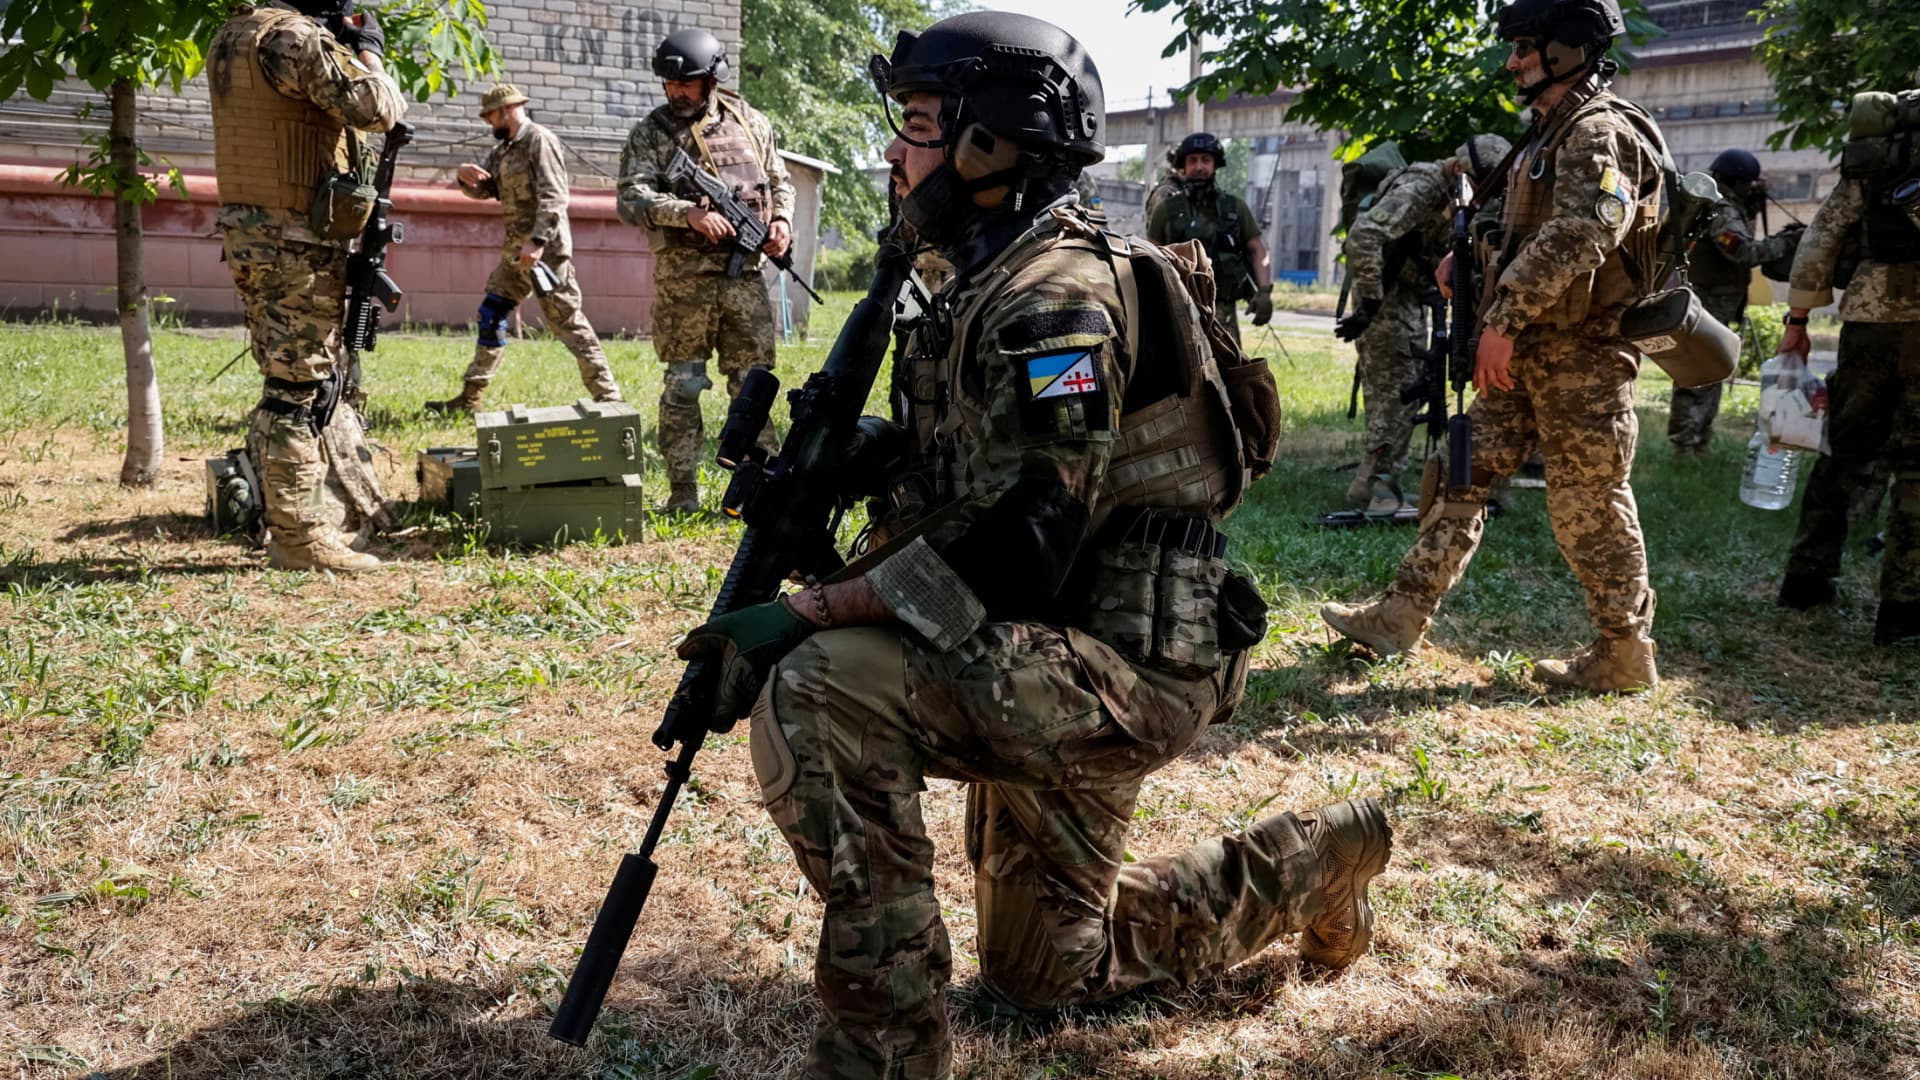 Members of a foreign volunteers unit which fights in the Ukrainian army take positions, as Russia's attack on Ukraine continues, in Sievierodonetsk, Luhansk region Ukraine June 2, 2022.